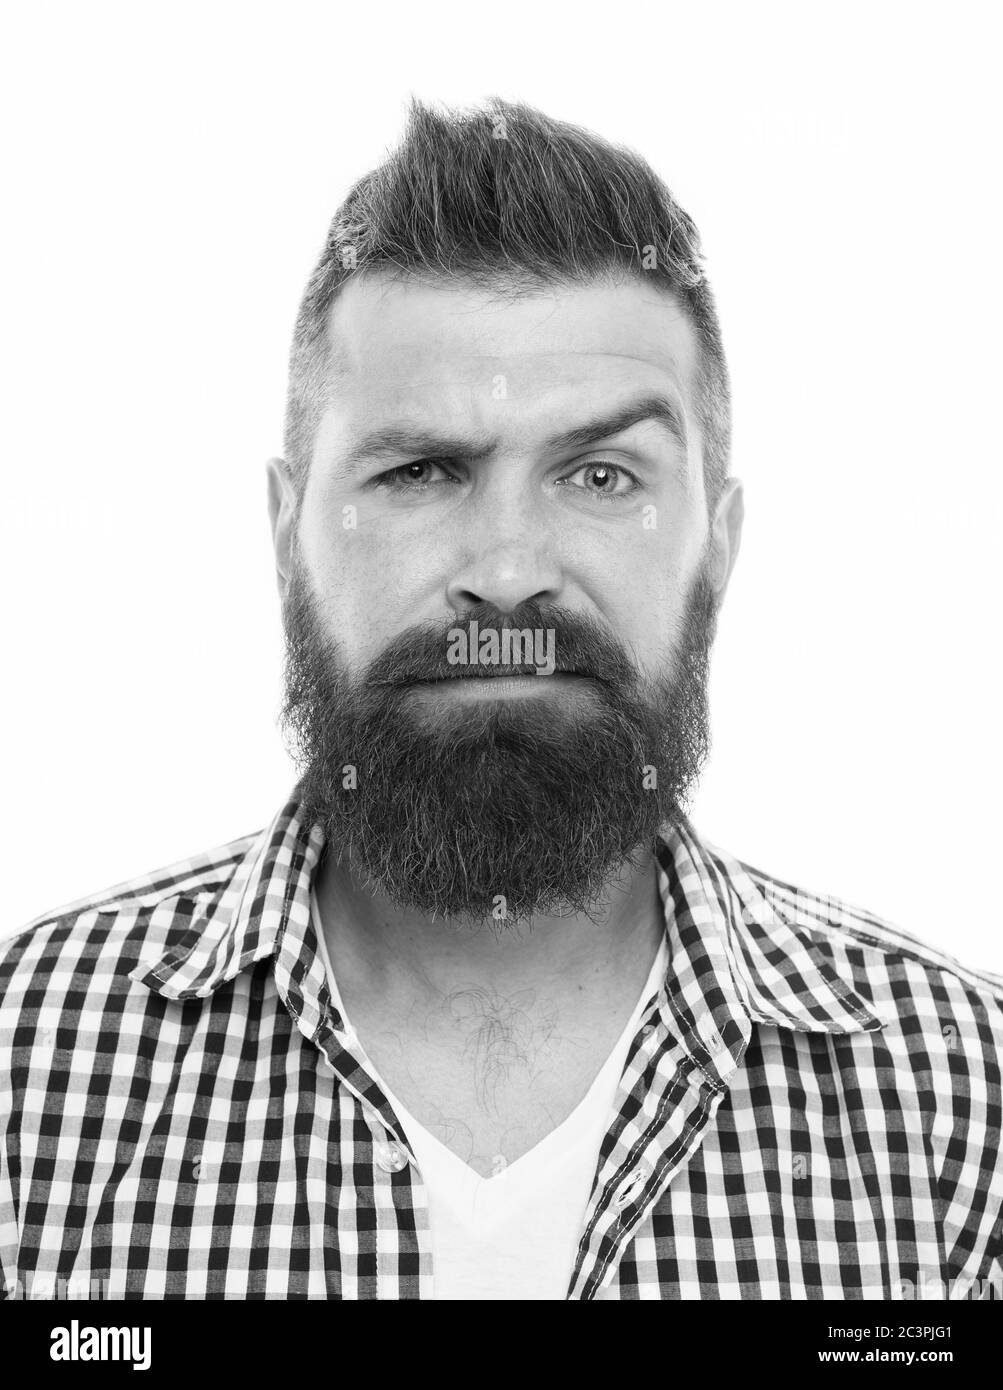 Mature hipster with beard. trendsetter hipster with mustache isolated on white. mustachioed and bearded male. after hairdresser salon. barbershop master. mustache from barber. Fabulous at any age. Stock Photo